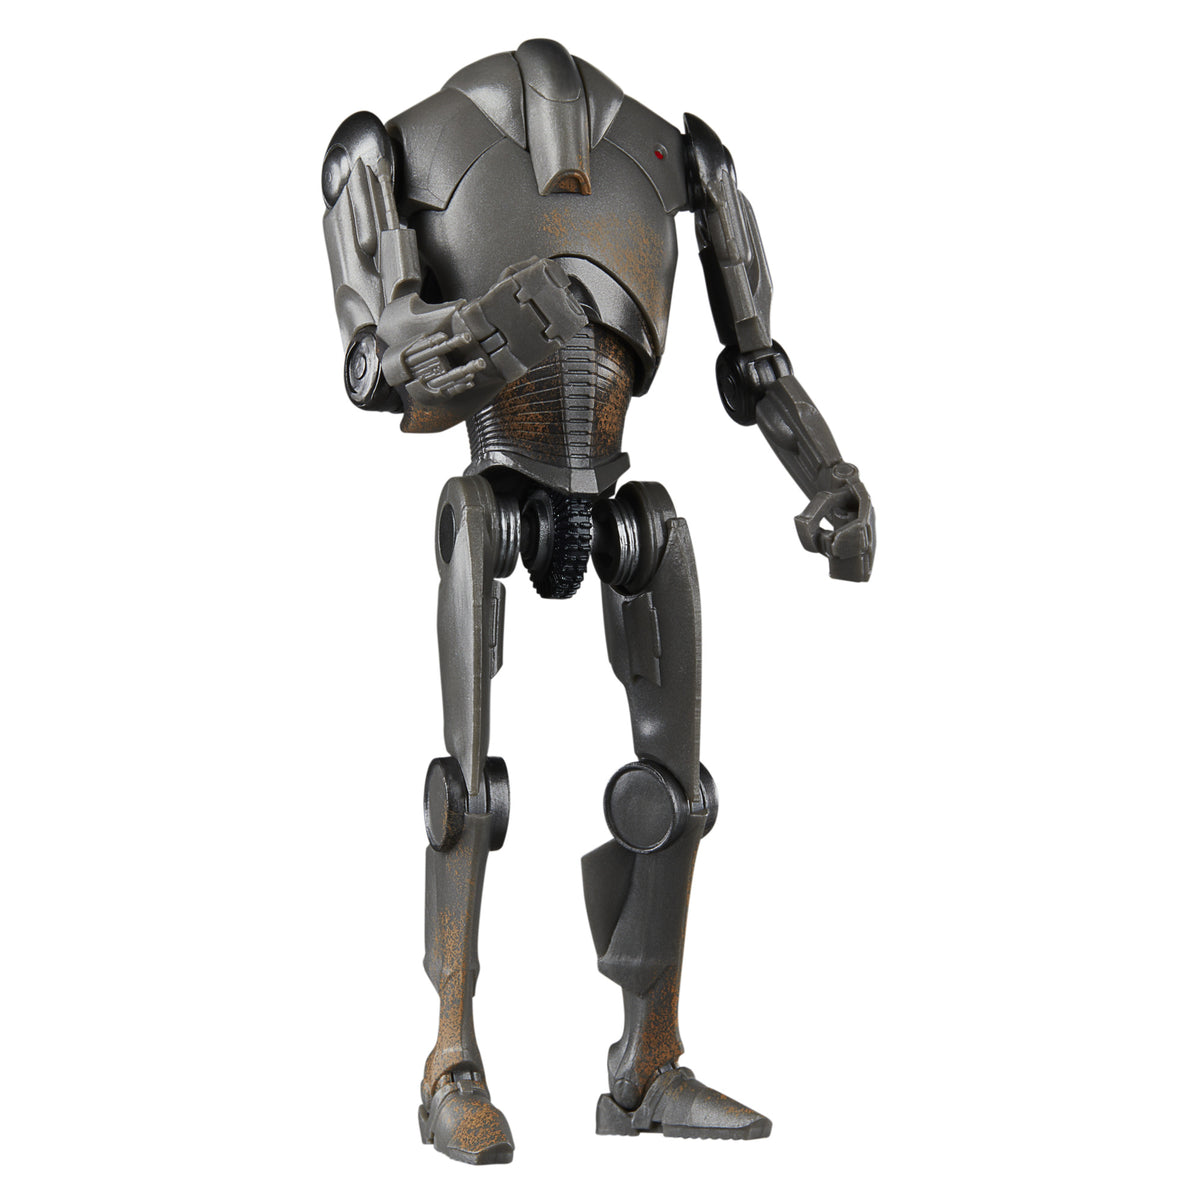 New Hasbro Star Wars Figures Inspired by 'Star Wars: Droids